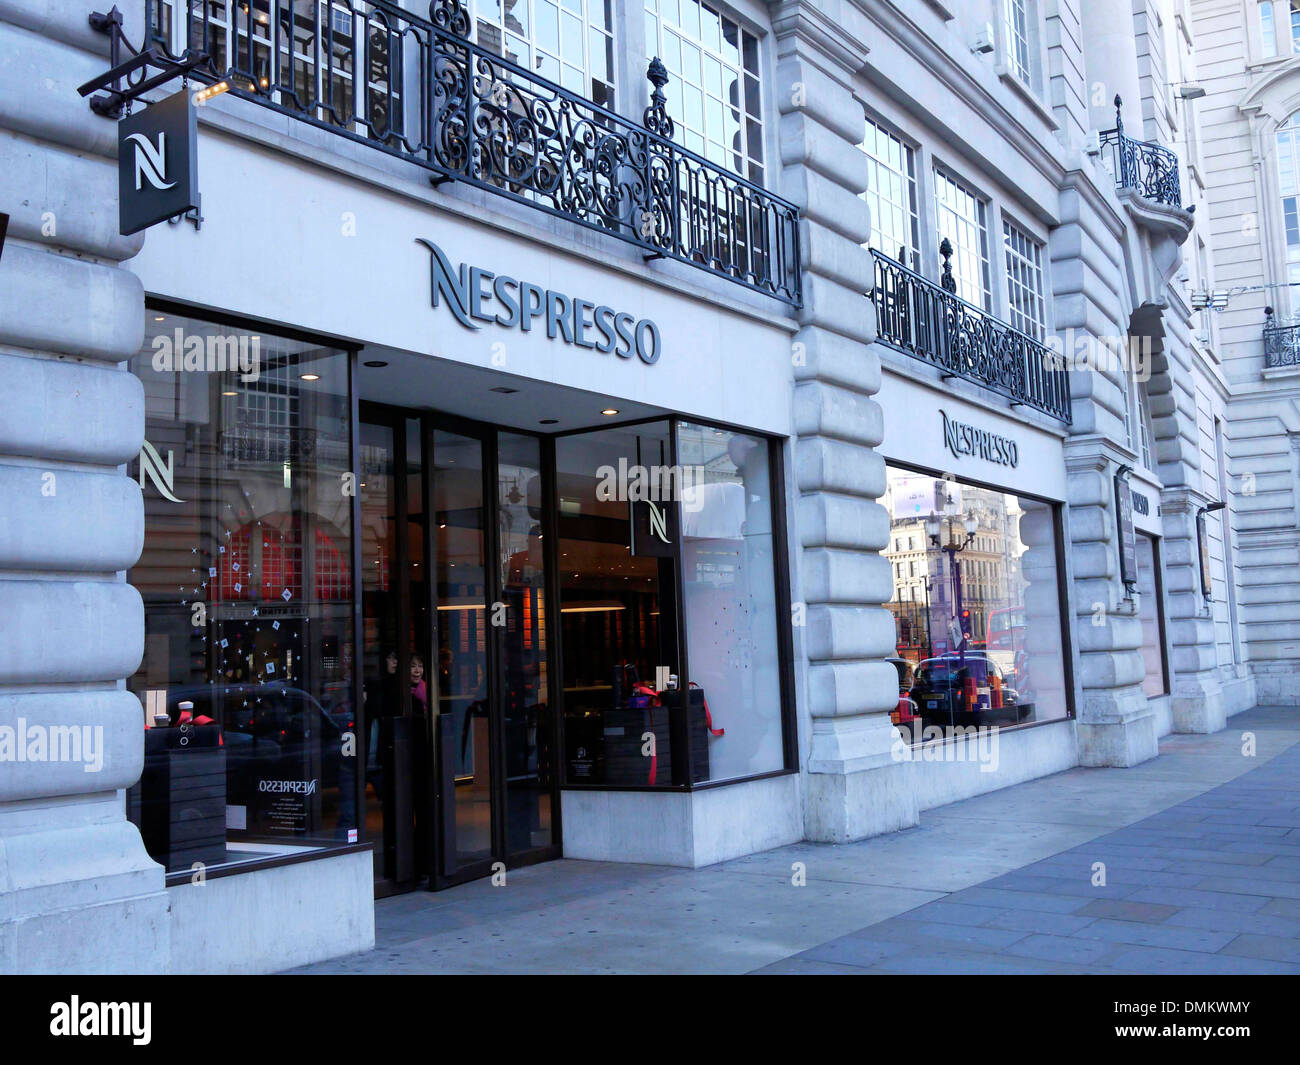 Nespresso Shop High Resolution Stock Photography and Images - Alamy